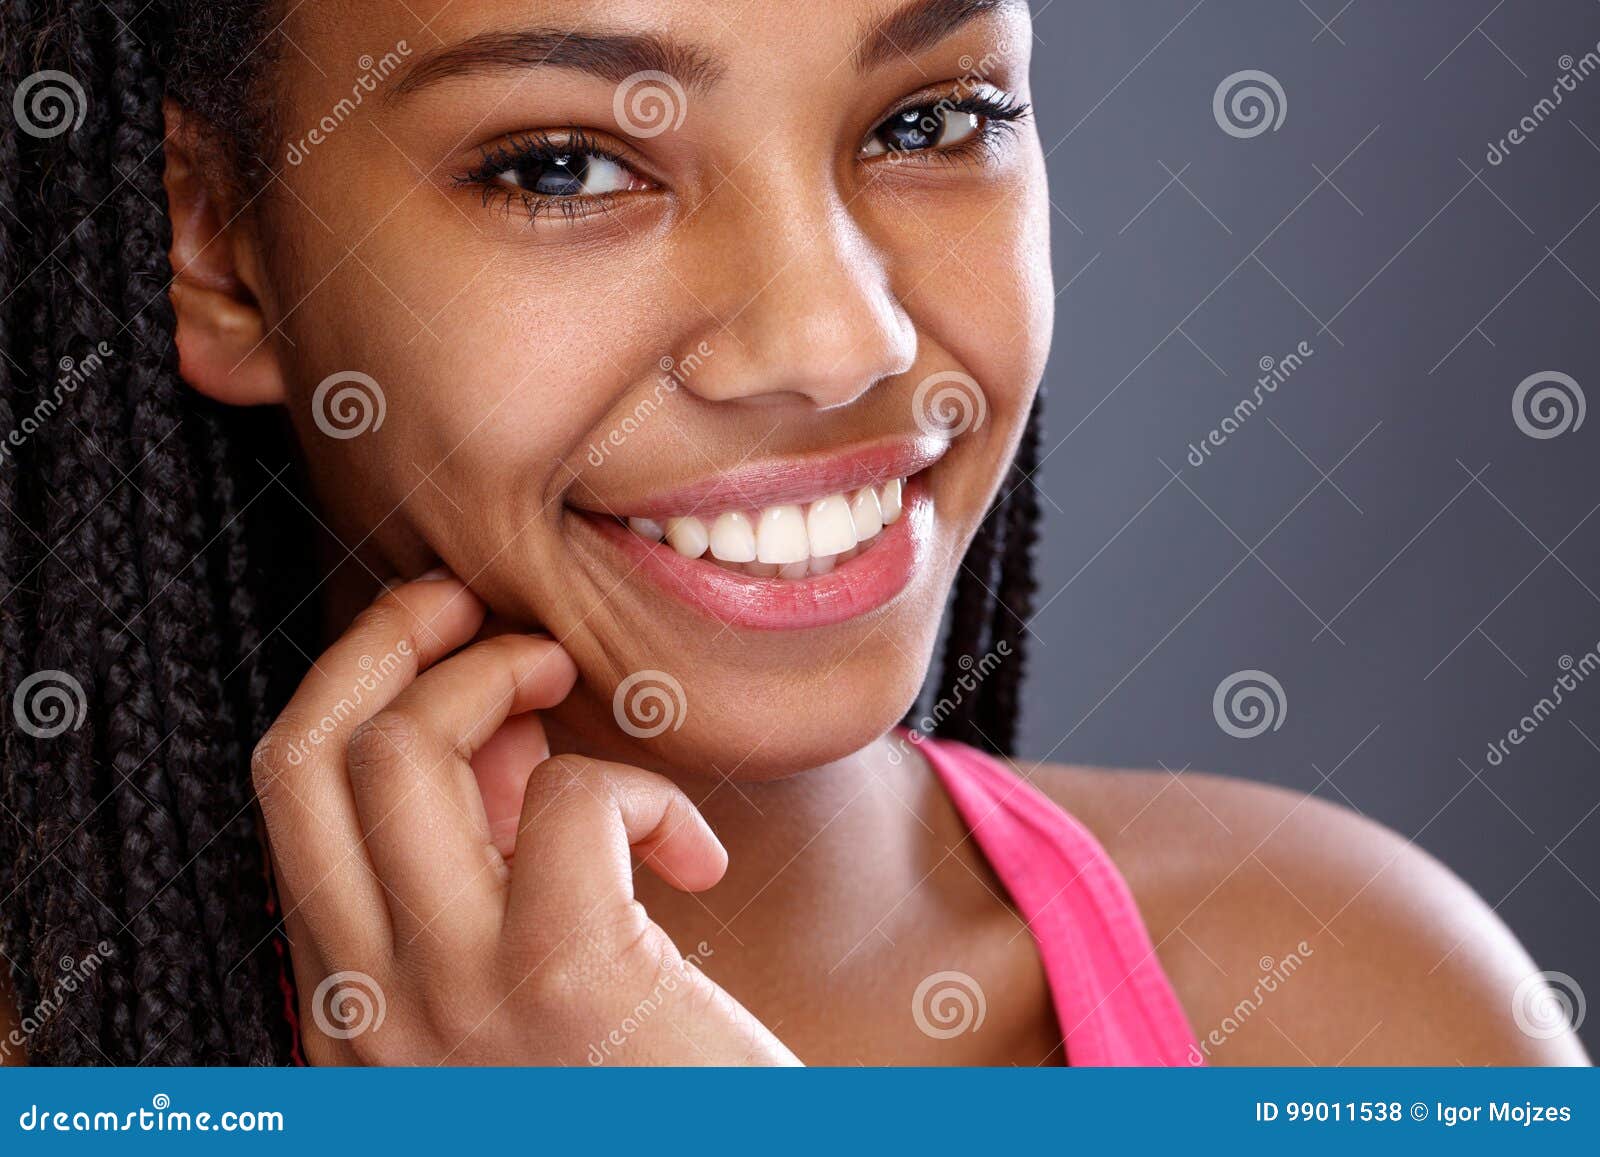 face of afro-american girl with nice smile